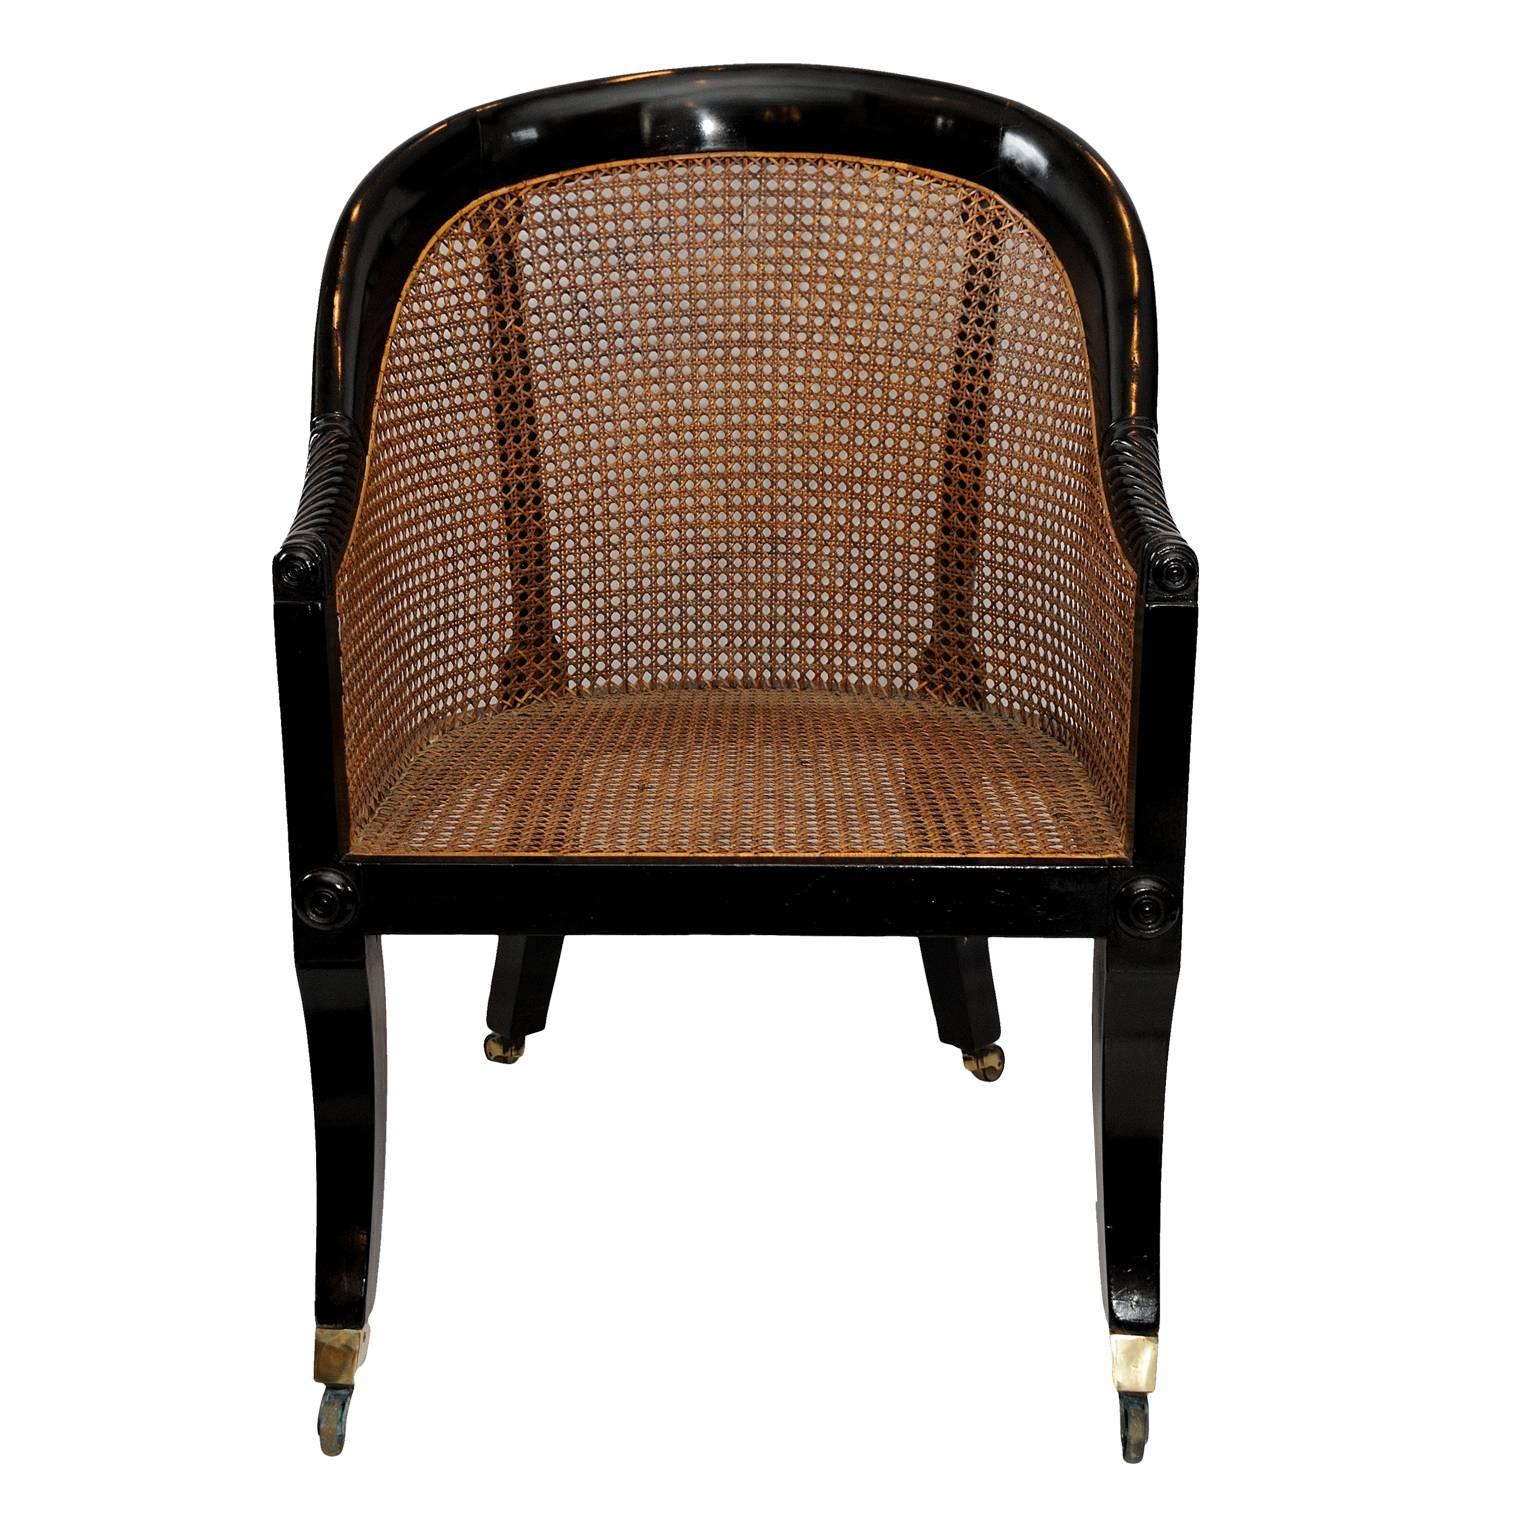 This is a very nice example of an English early 19th century Regency ebonized library chair, with stylish sabre legs and brass square cup castors. The cane work is in very good condition, circa 1810.
 